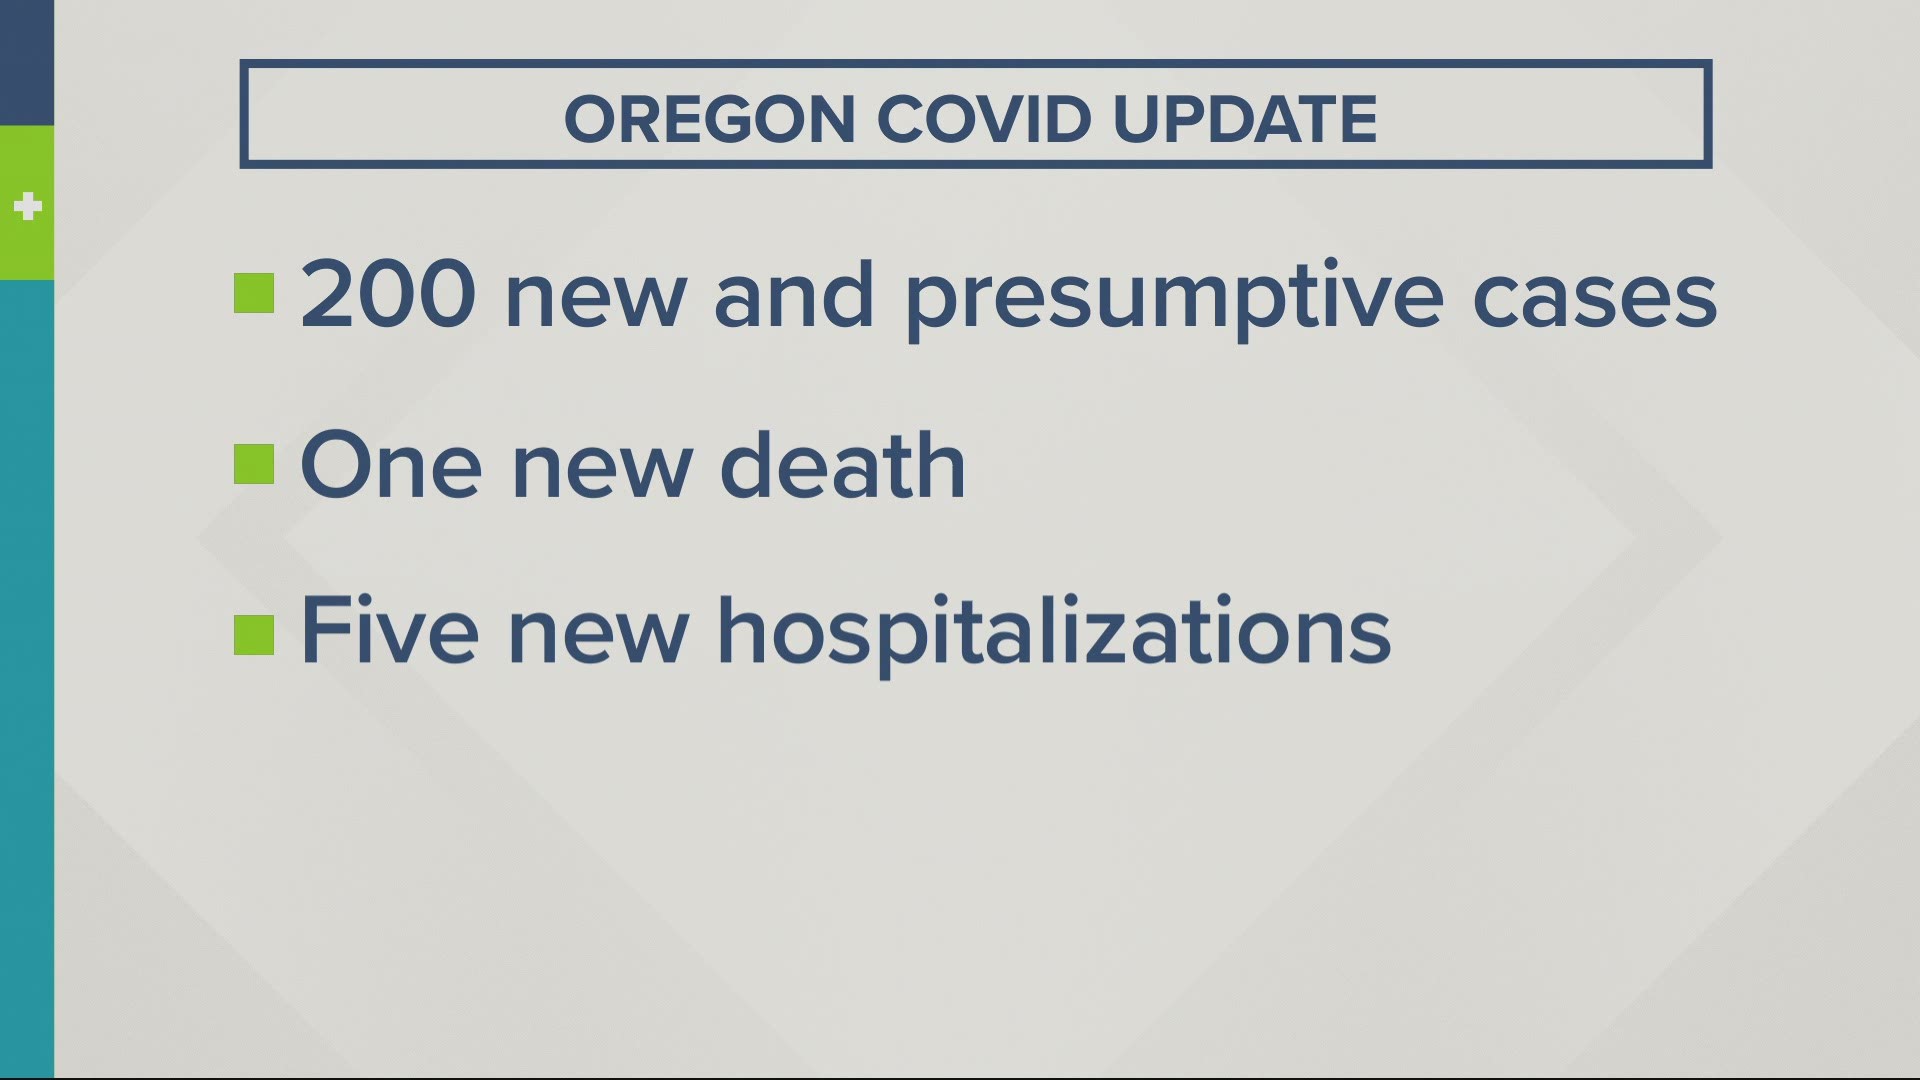 In its daily update on Sunday, the Oregon Health Authority reported 200 new COVID-19 cases in the state and one more death.